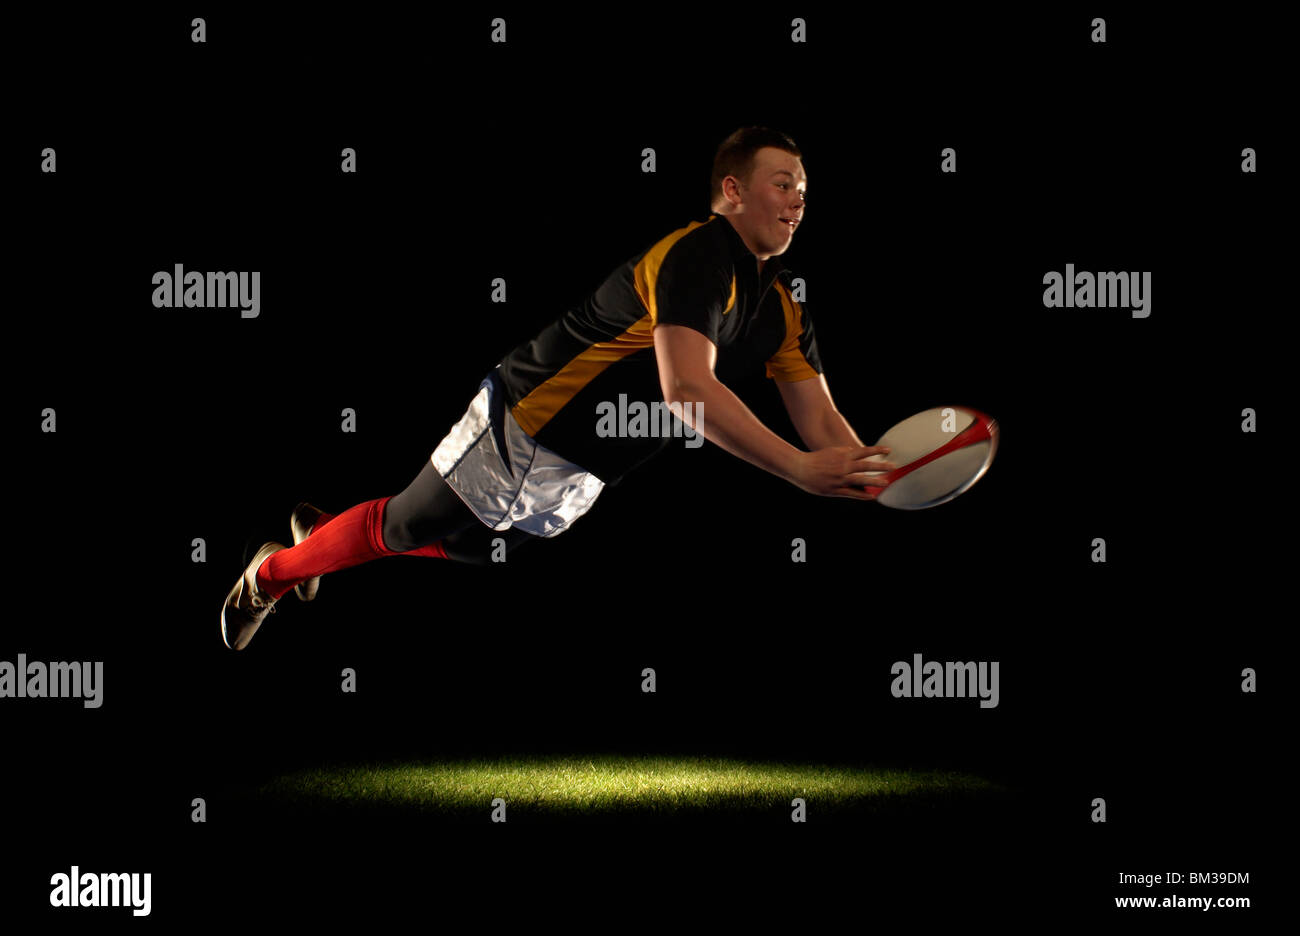 Rugby player diving an throwing ball Stock Photo